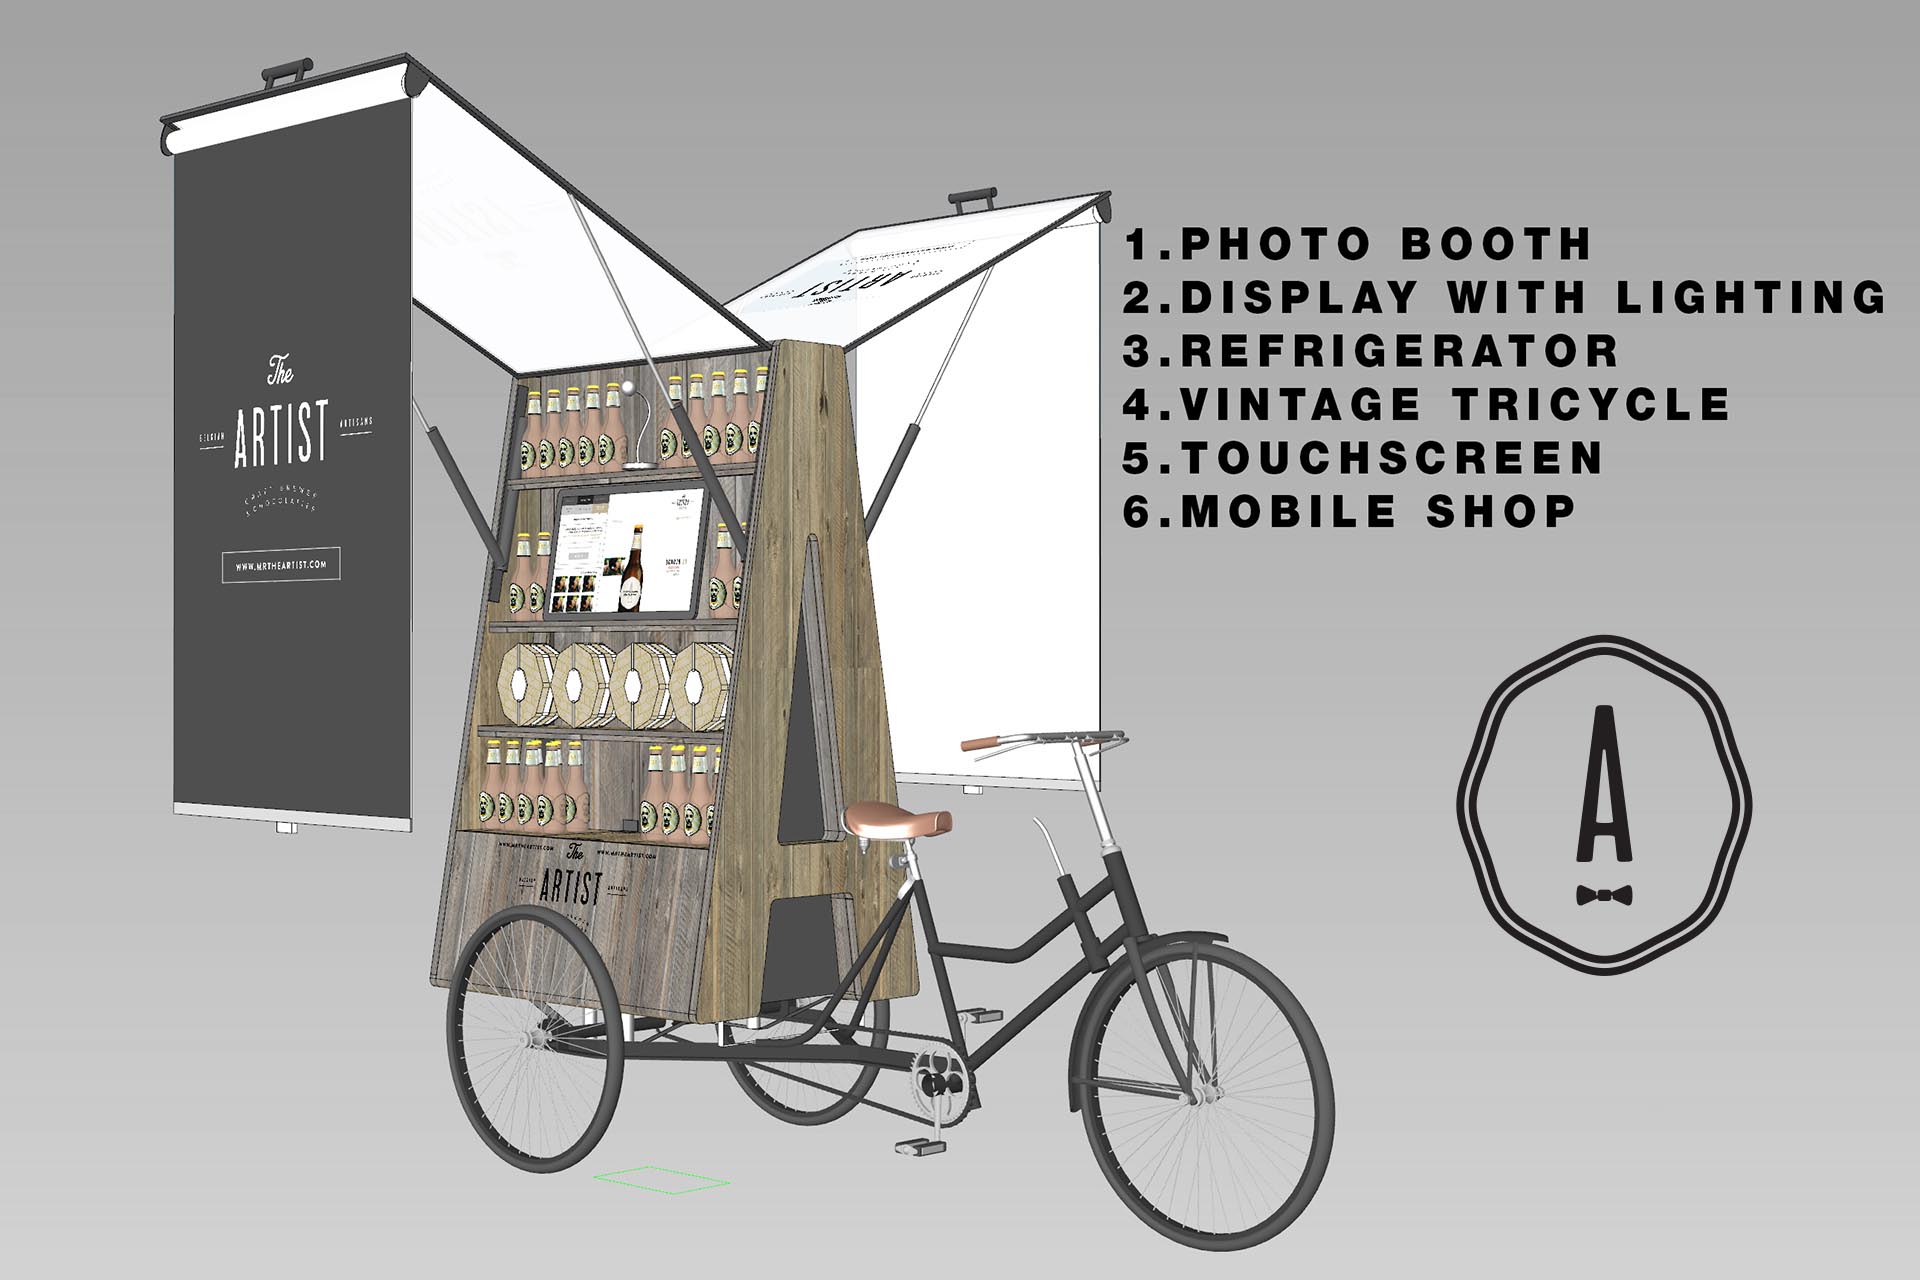 pop up shop, beer, chocolate, tricycle, retail. popup, hong kong, vintage, mrtheartist, mobile shop, old